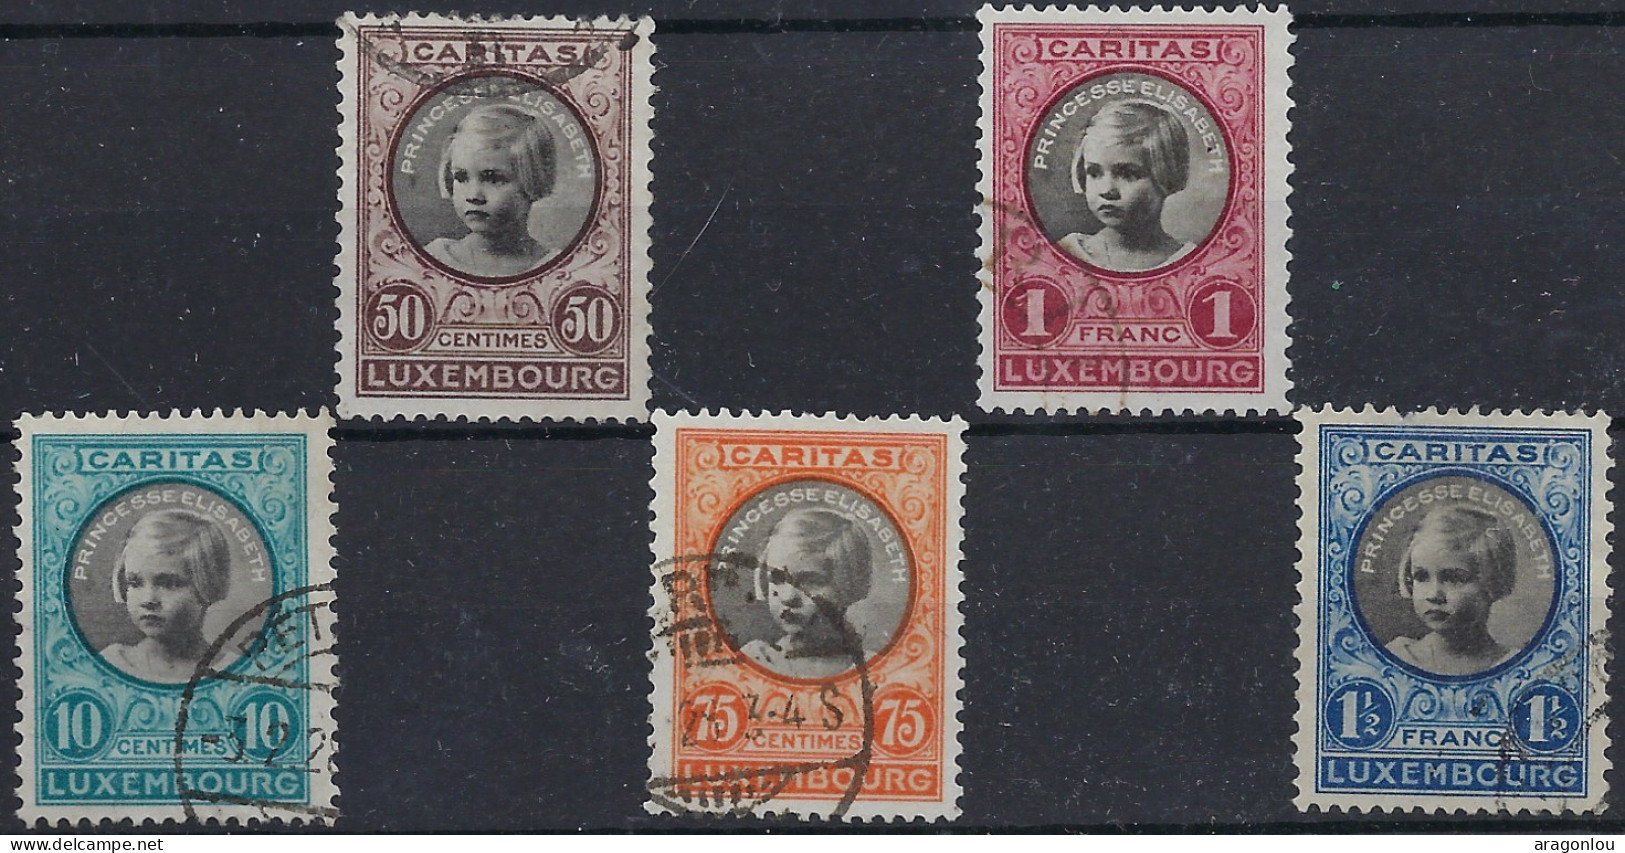 Luxembourg - Luxemburg - Timbres - 1927   Caritas   Princesse Elisabeth   Série   ° - Used Stamps